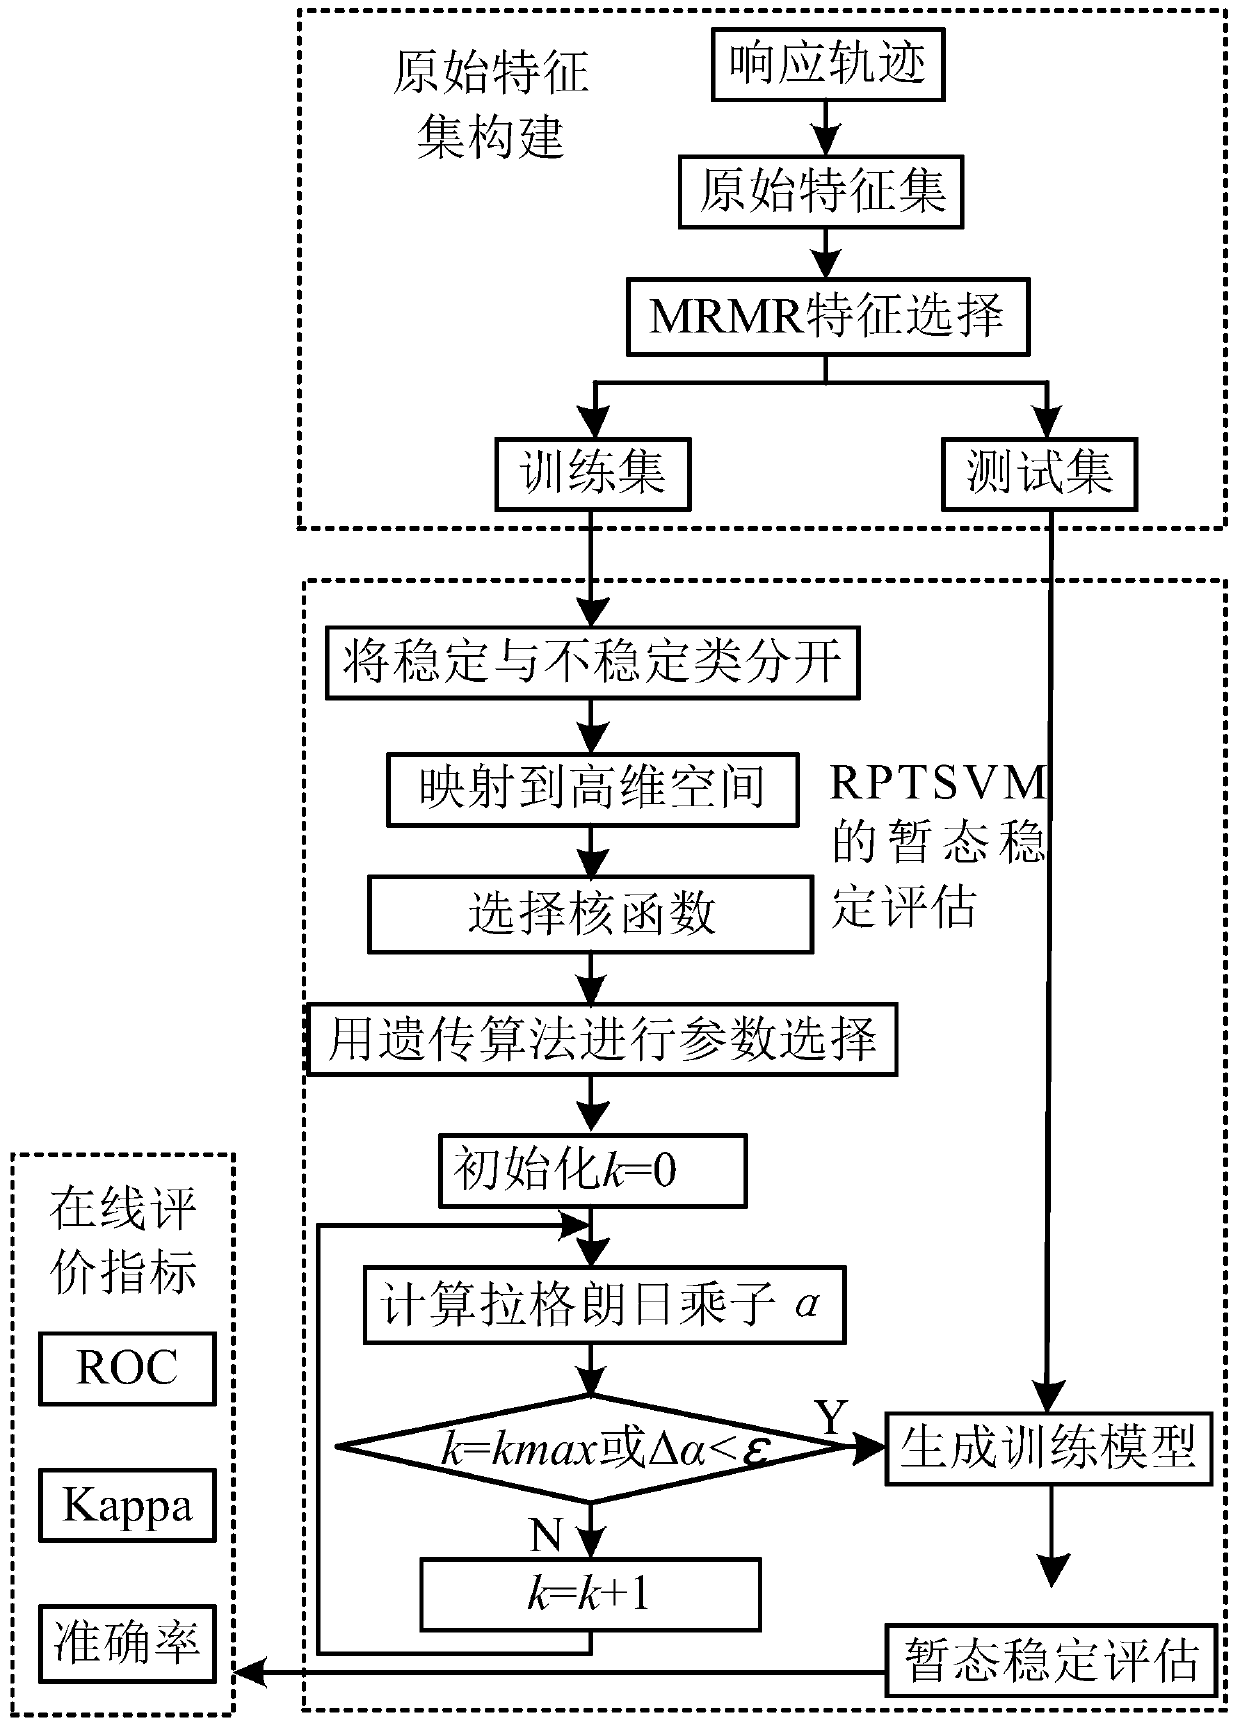 A Power System Transient Stability Evaluation Method Based on rptsvm